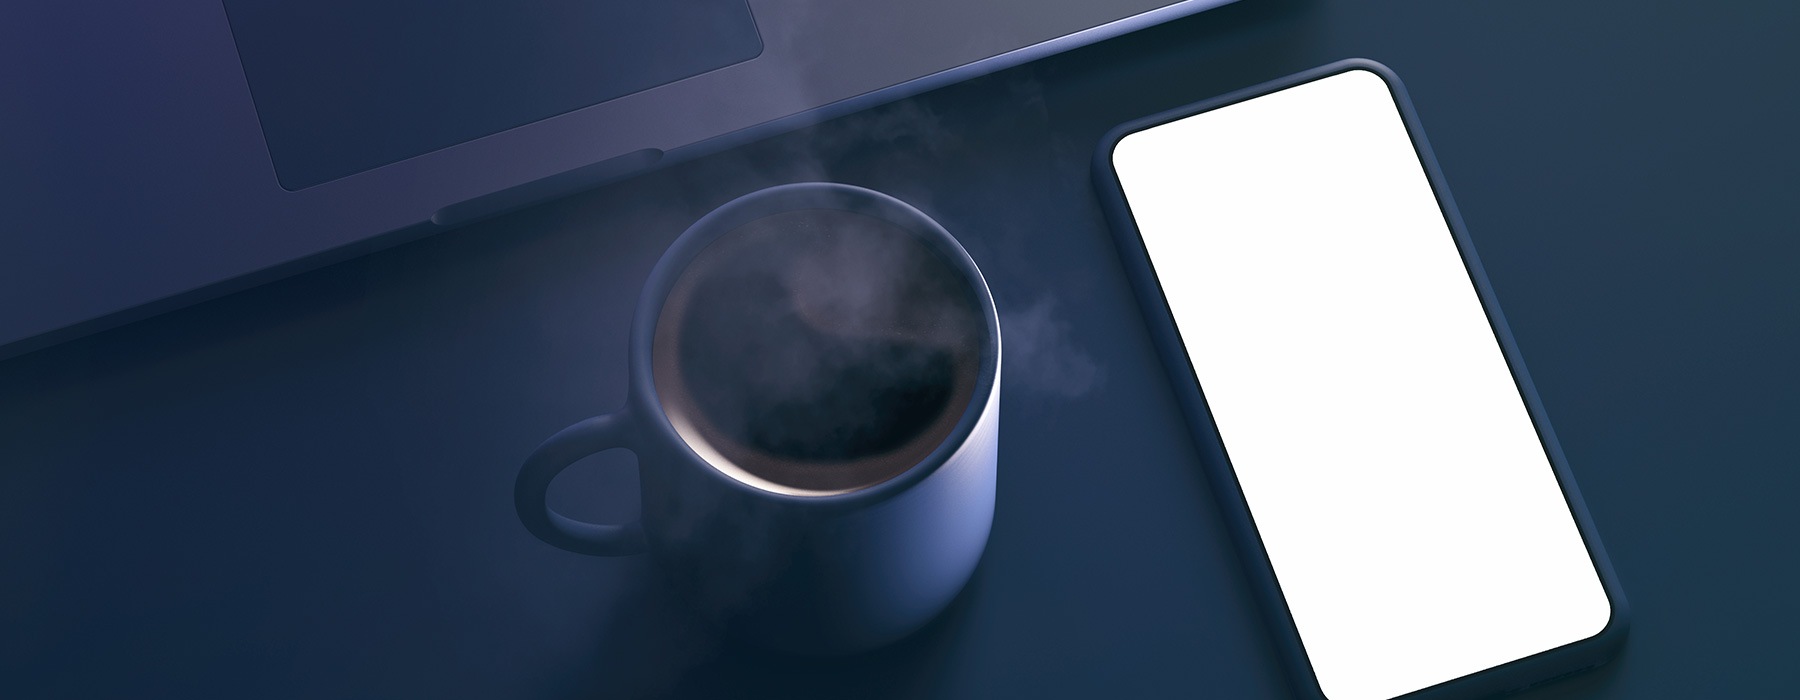 lifestyle image of a cup of coffee beside a smart phone on a desk